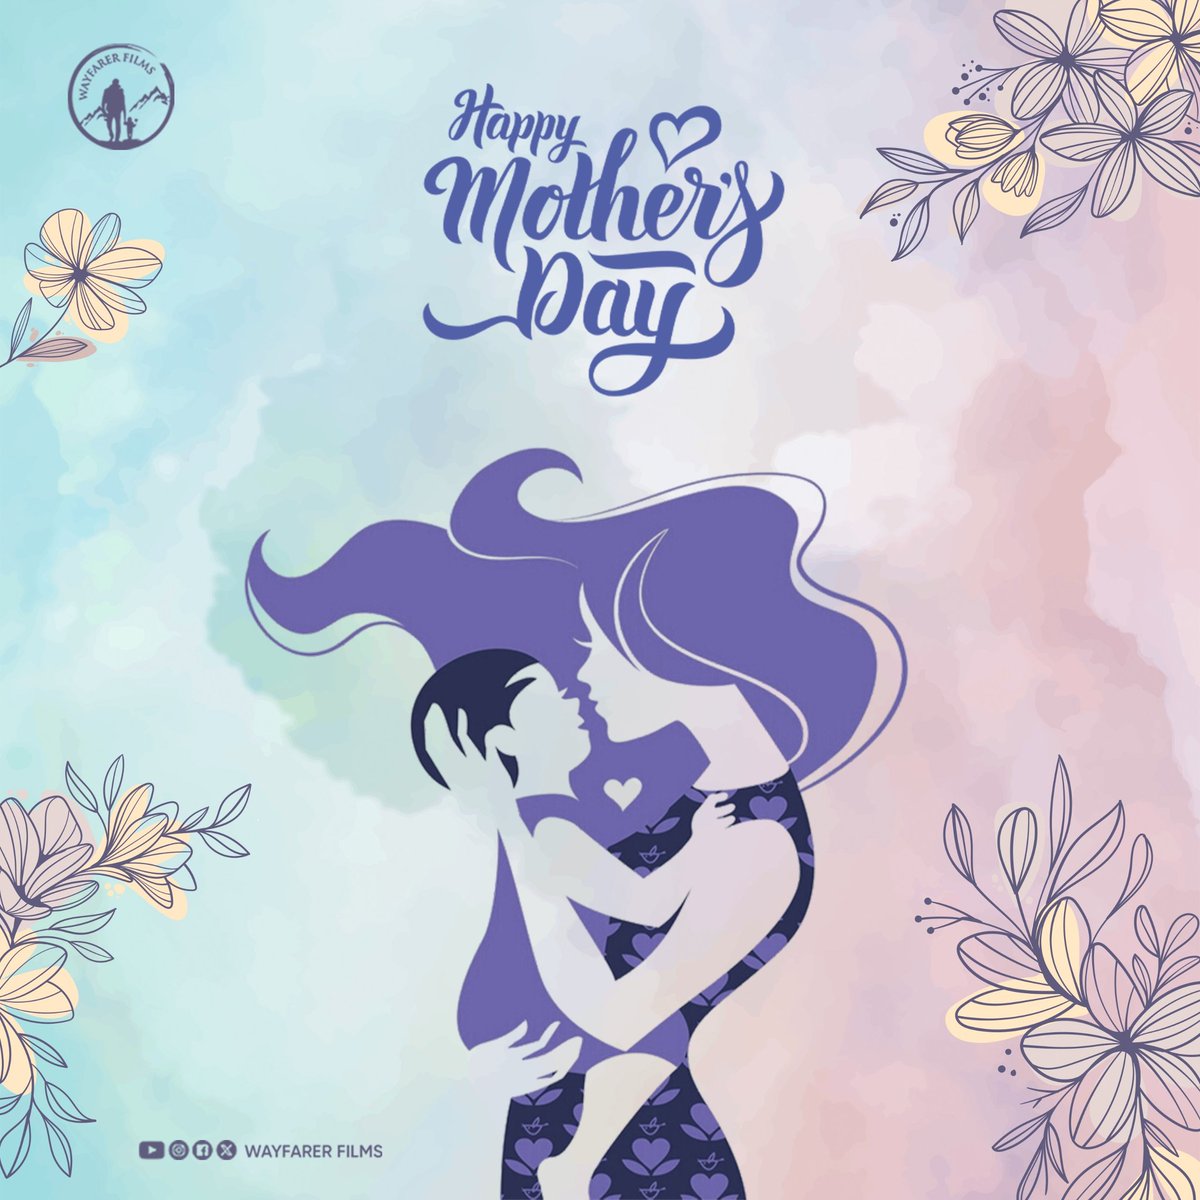 Happy Mother's Day to all the incredible moms out there! #HappyMothersDay